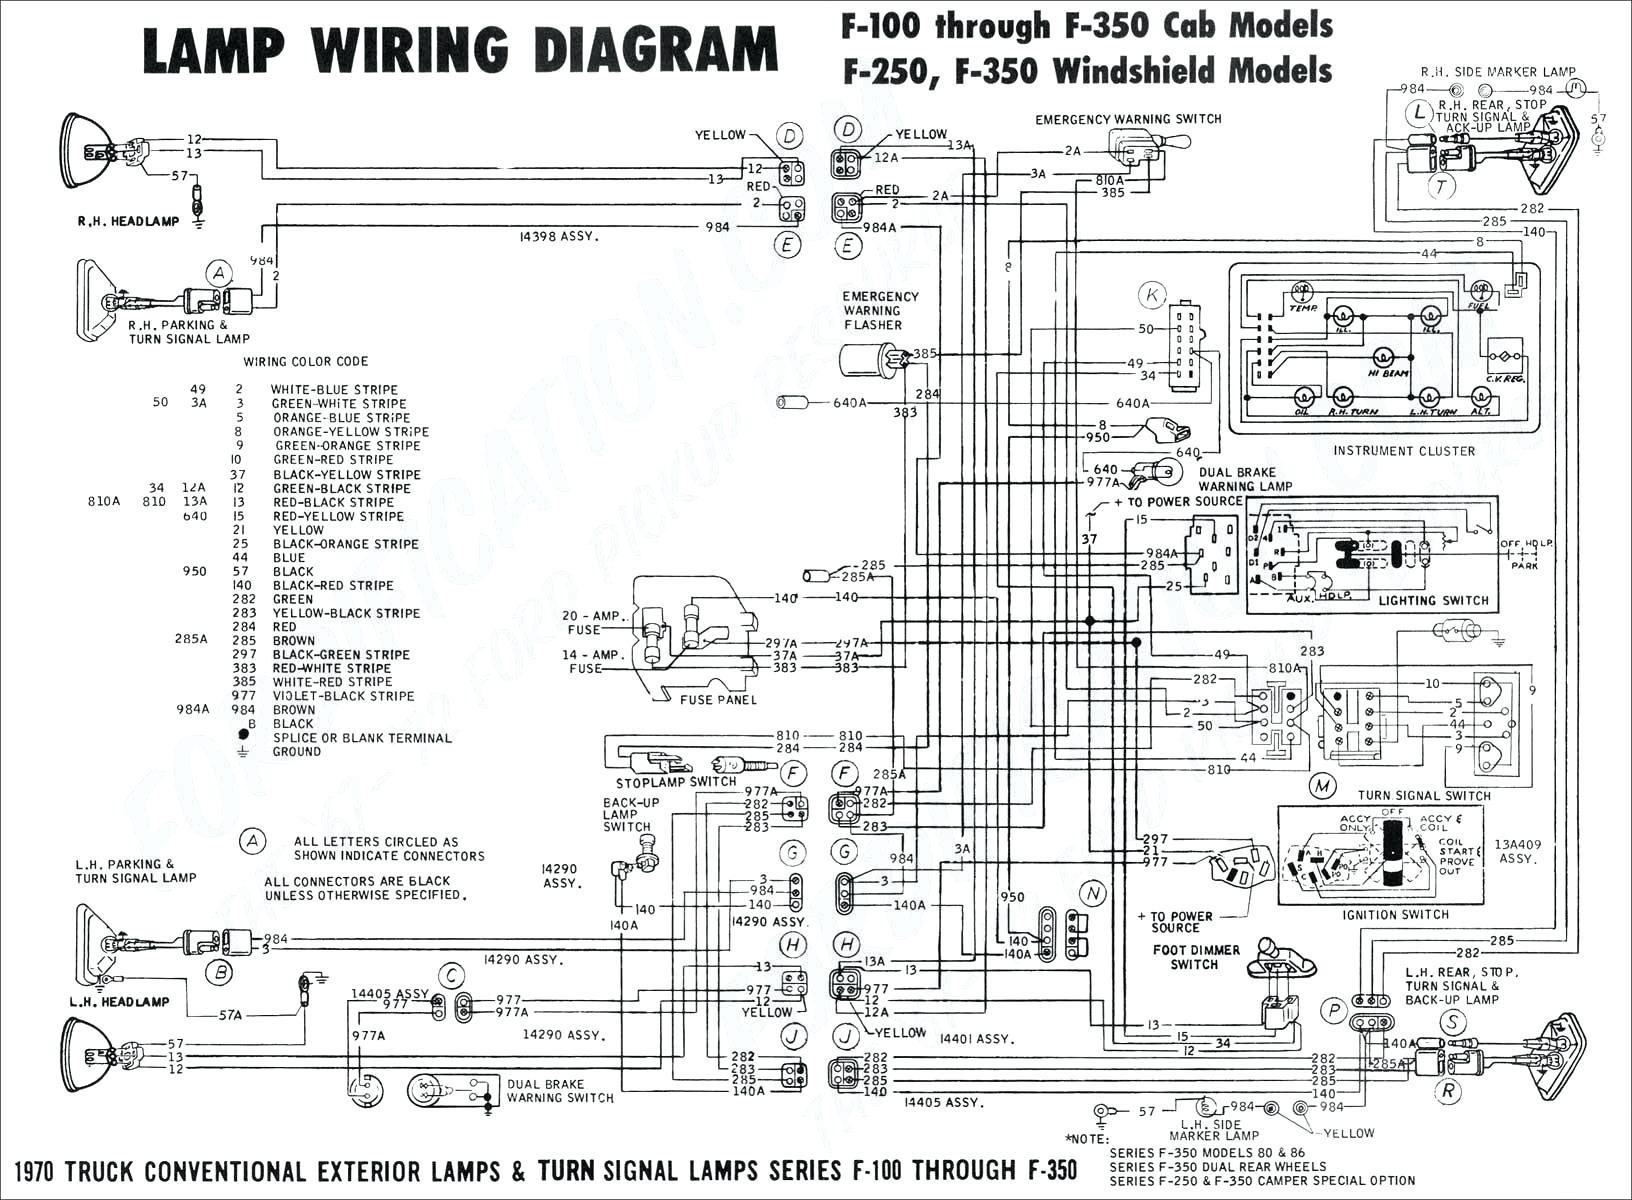 Wrire Schematic for A 1989 Ezgo Textron Model Xi875 Home Light Switch Wiring Diagram Of Wrire Schematic for A 1989 Ezgo Textron Model Xi875